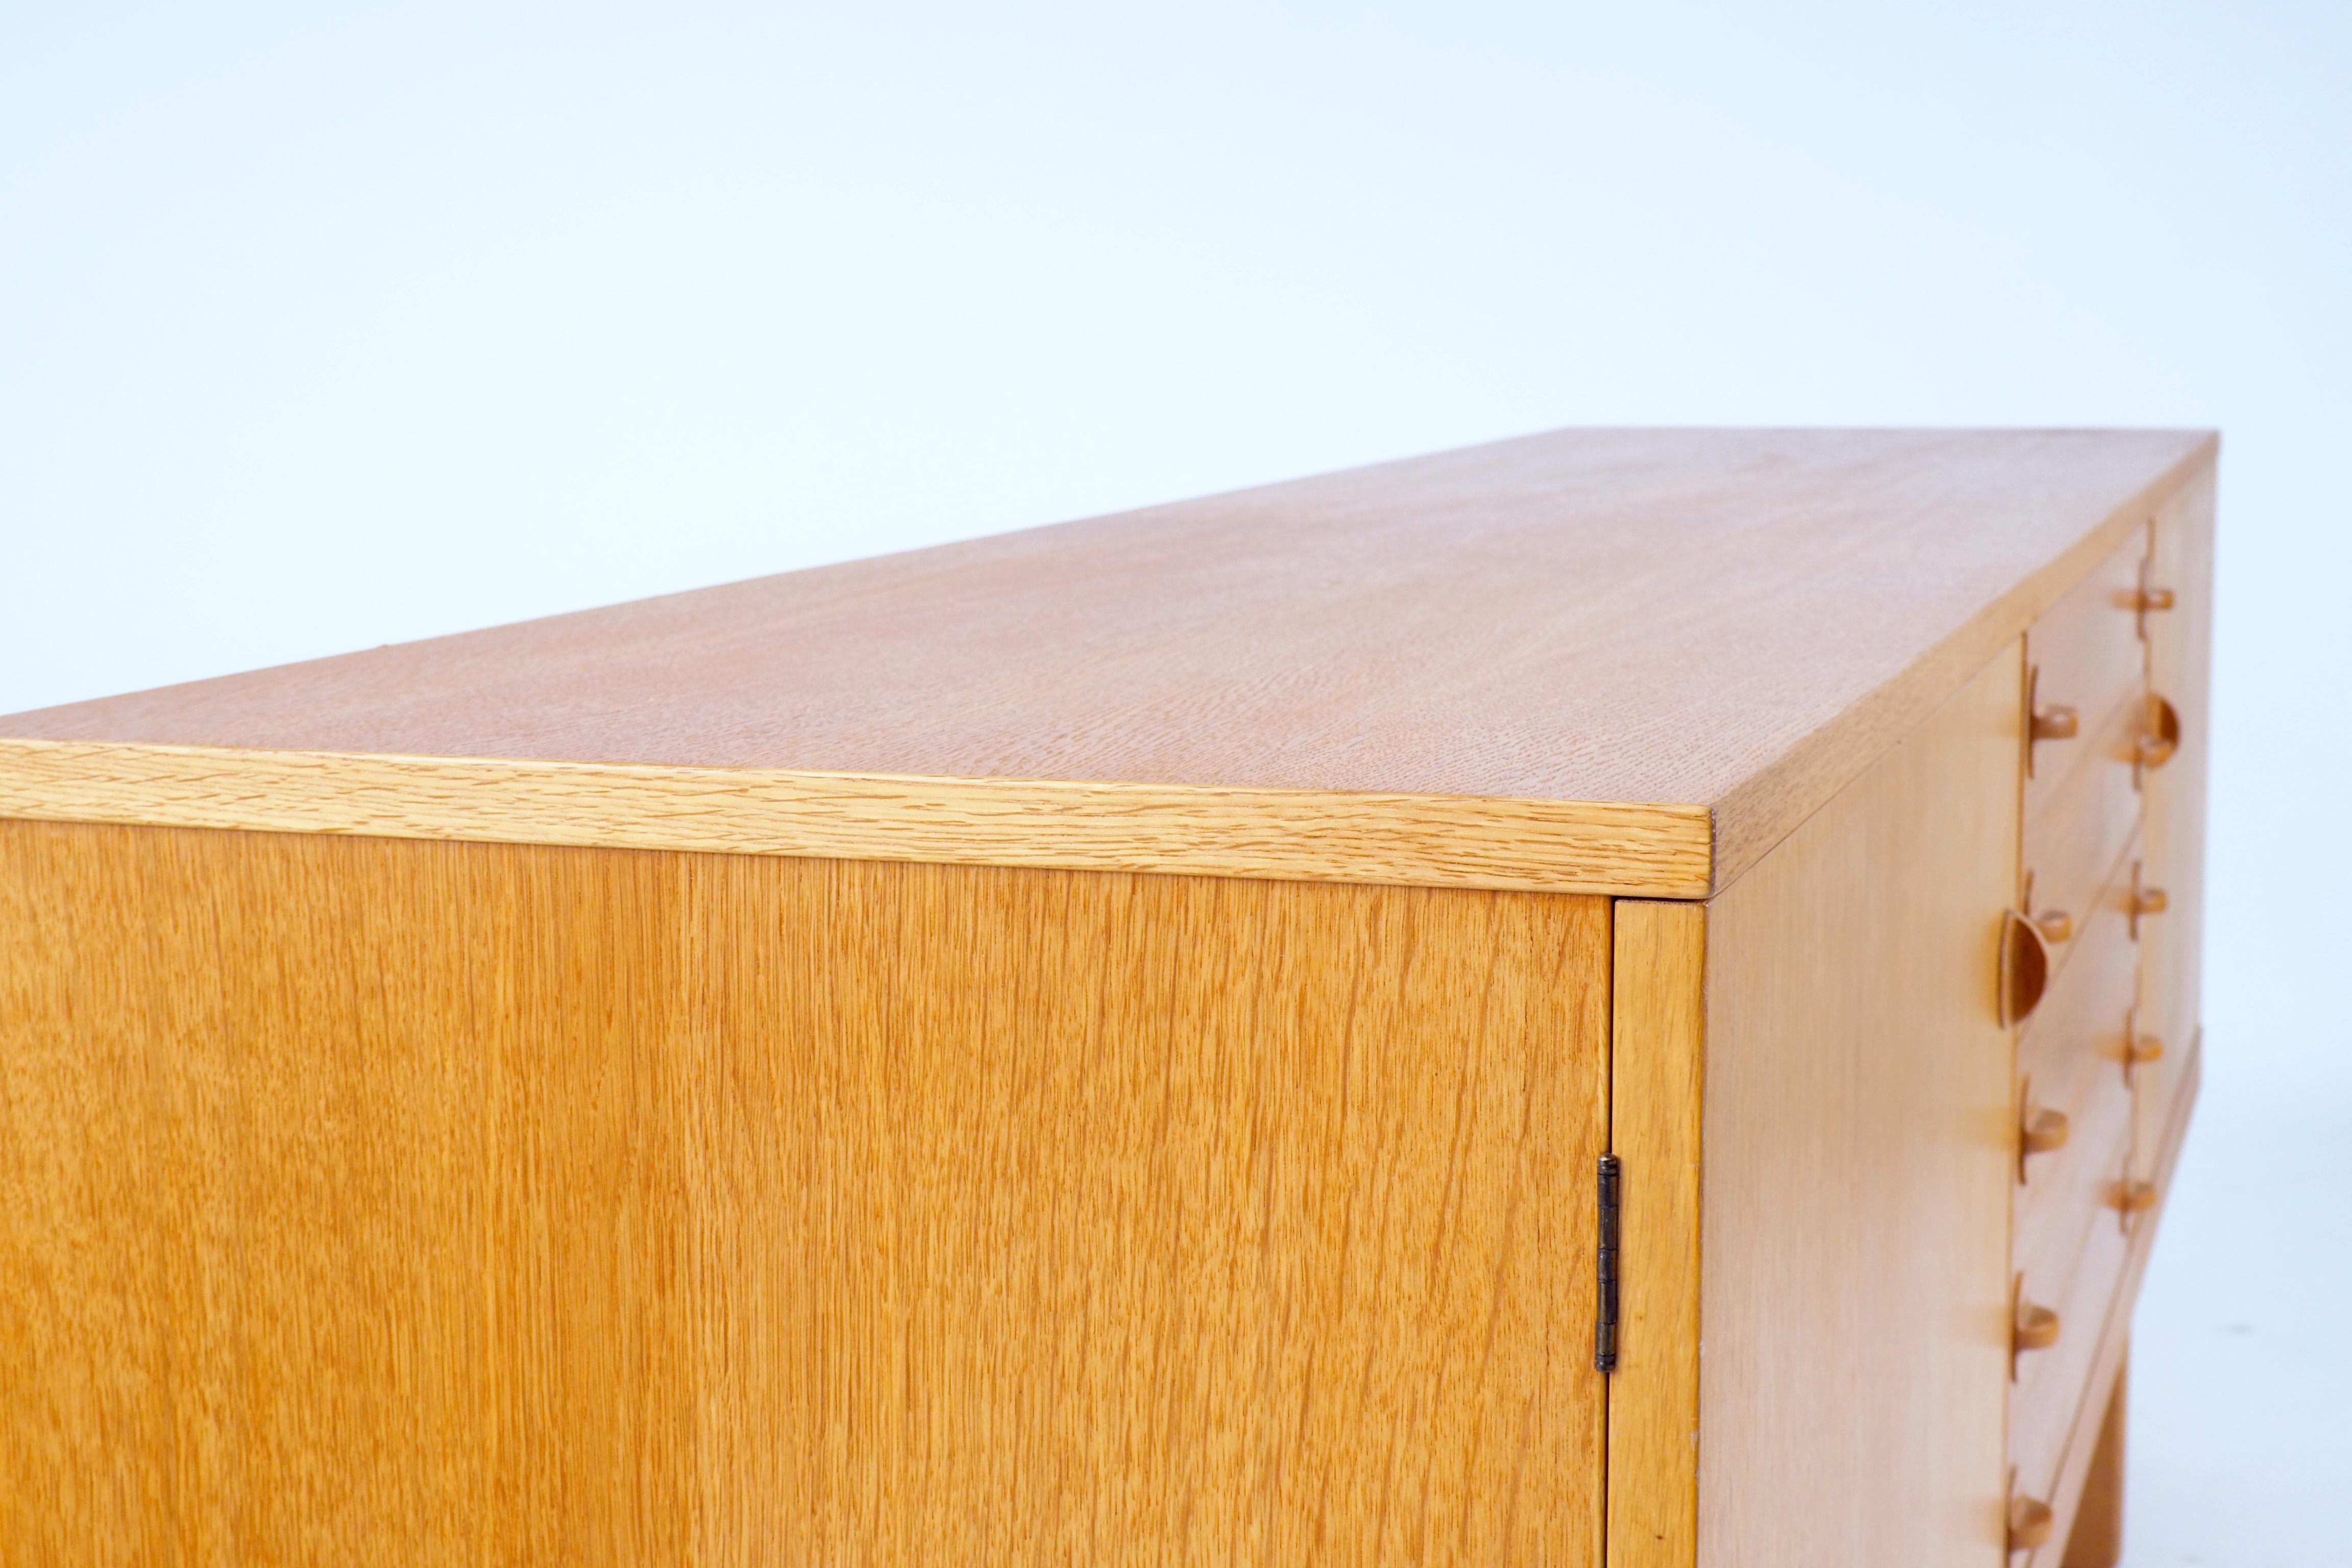 Sideboard in oak by Björn Hultén. Made in Sweden during the 1960s by Bofyra.
Hultén was the interior architect for more than 40 Swedish embassies all-over the world, for instance in Moscow and Washington.